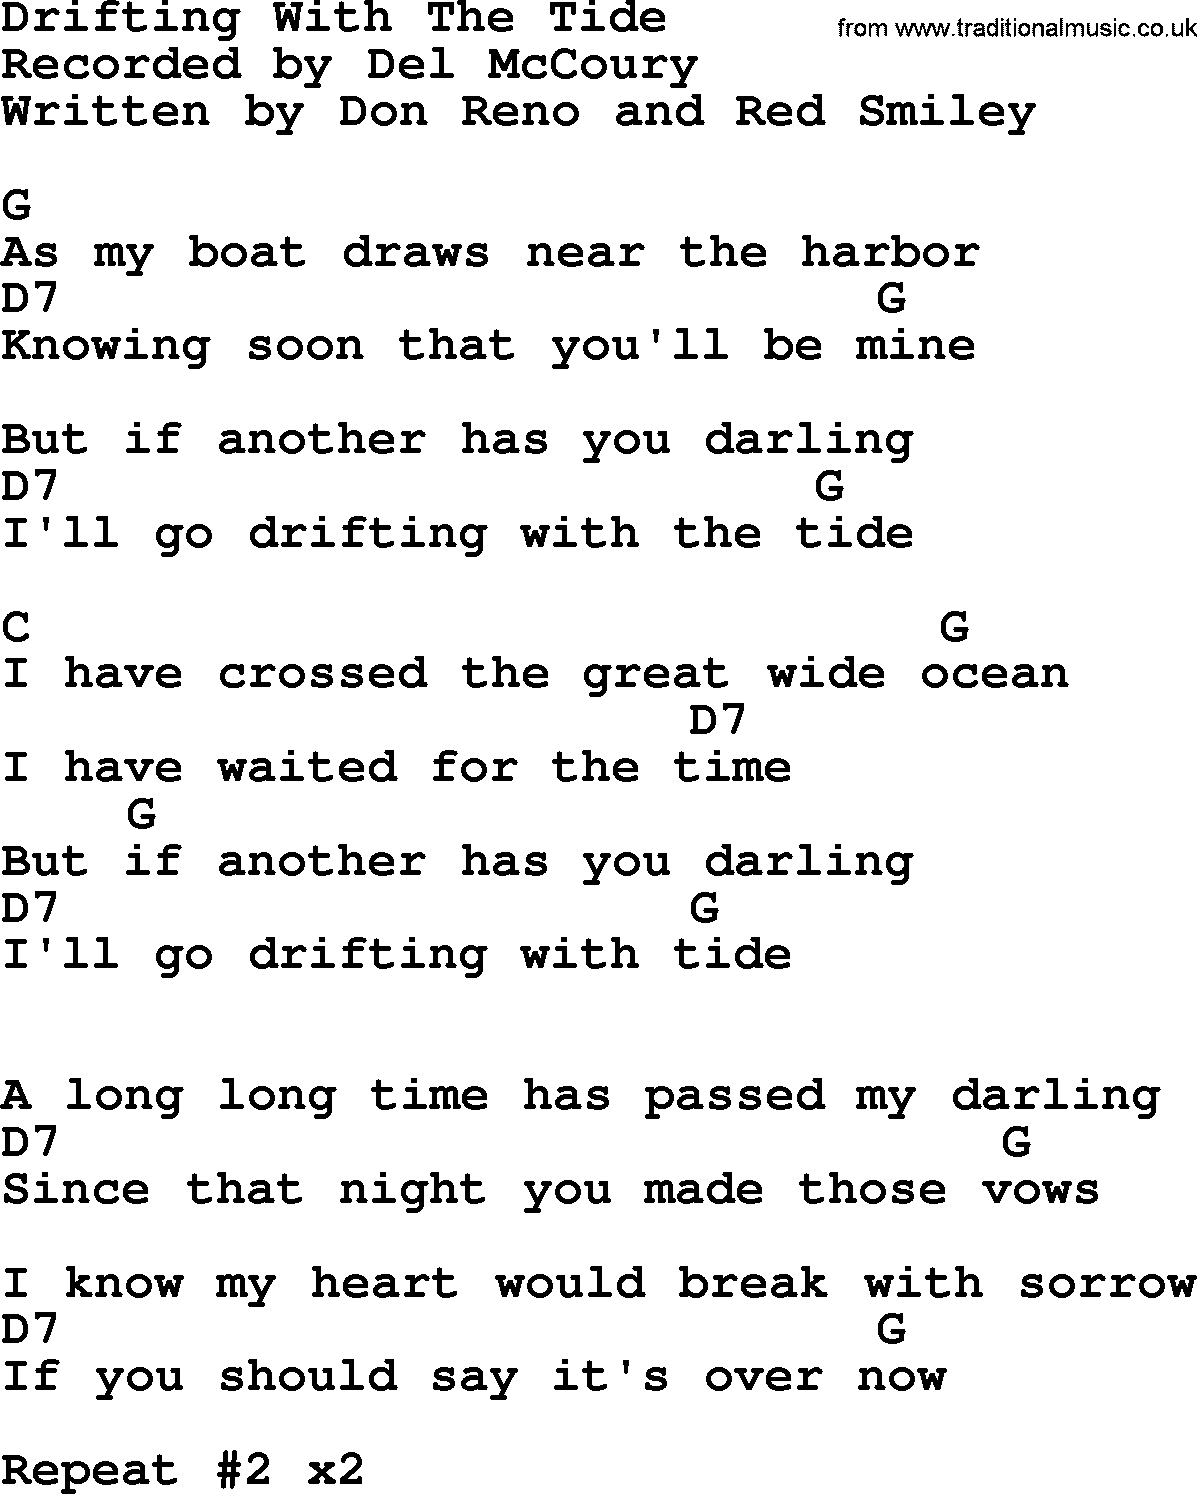 Bluegrass song: Drifting With The Tide, lyrics and chords